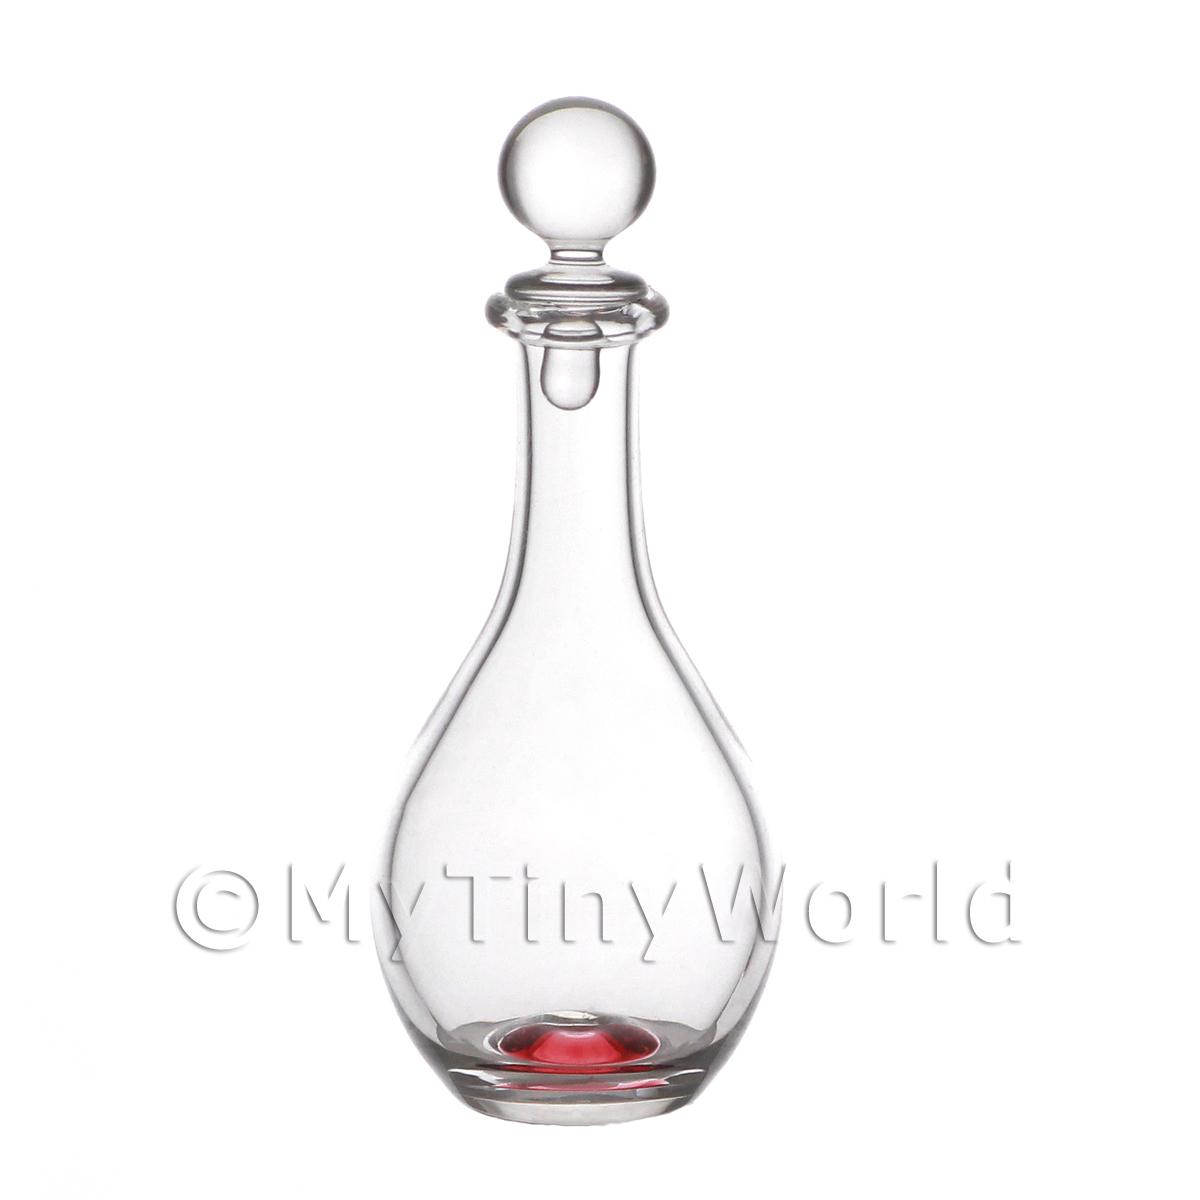 Dolls House Miniature Handmade Red Glass Classic Curved Decanter 